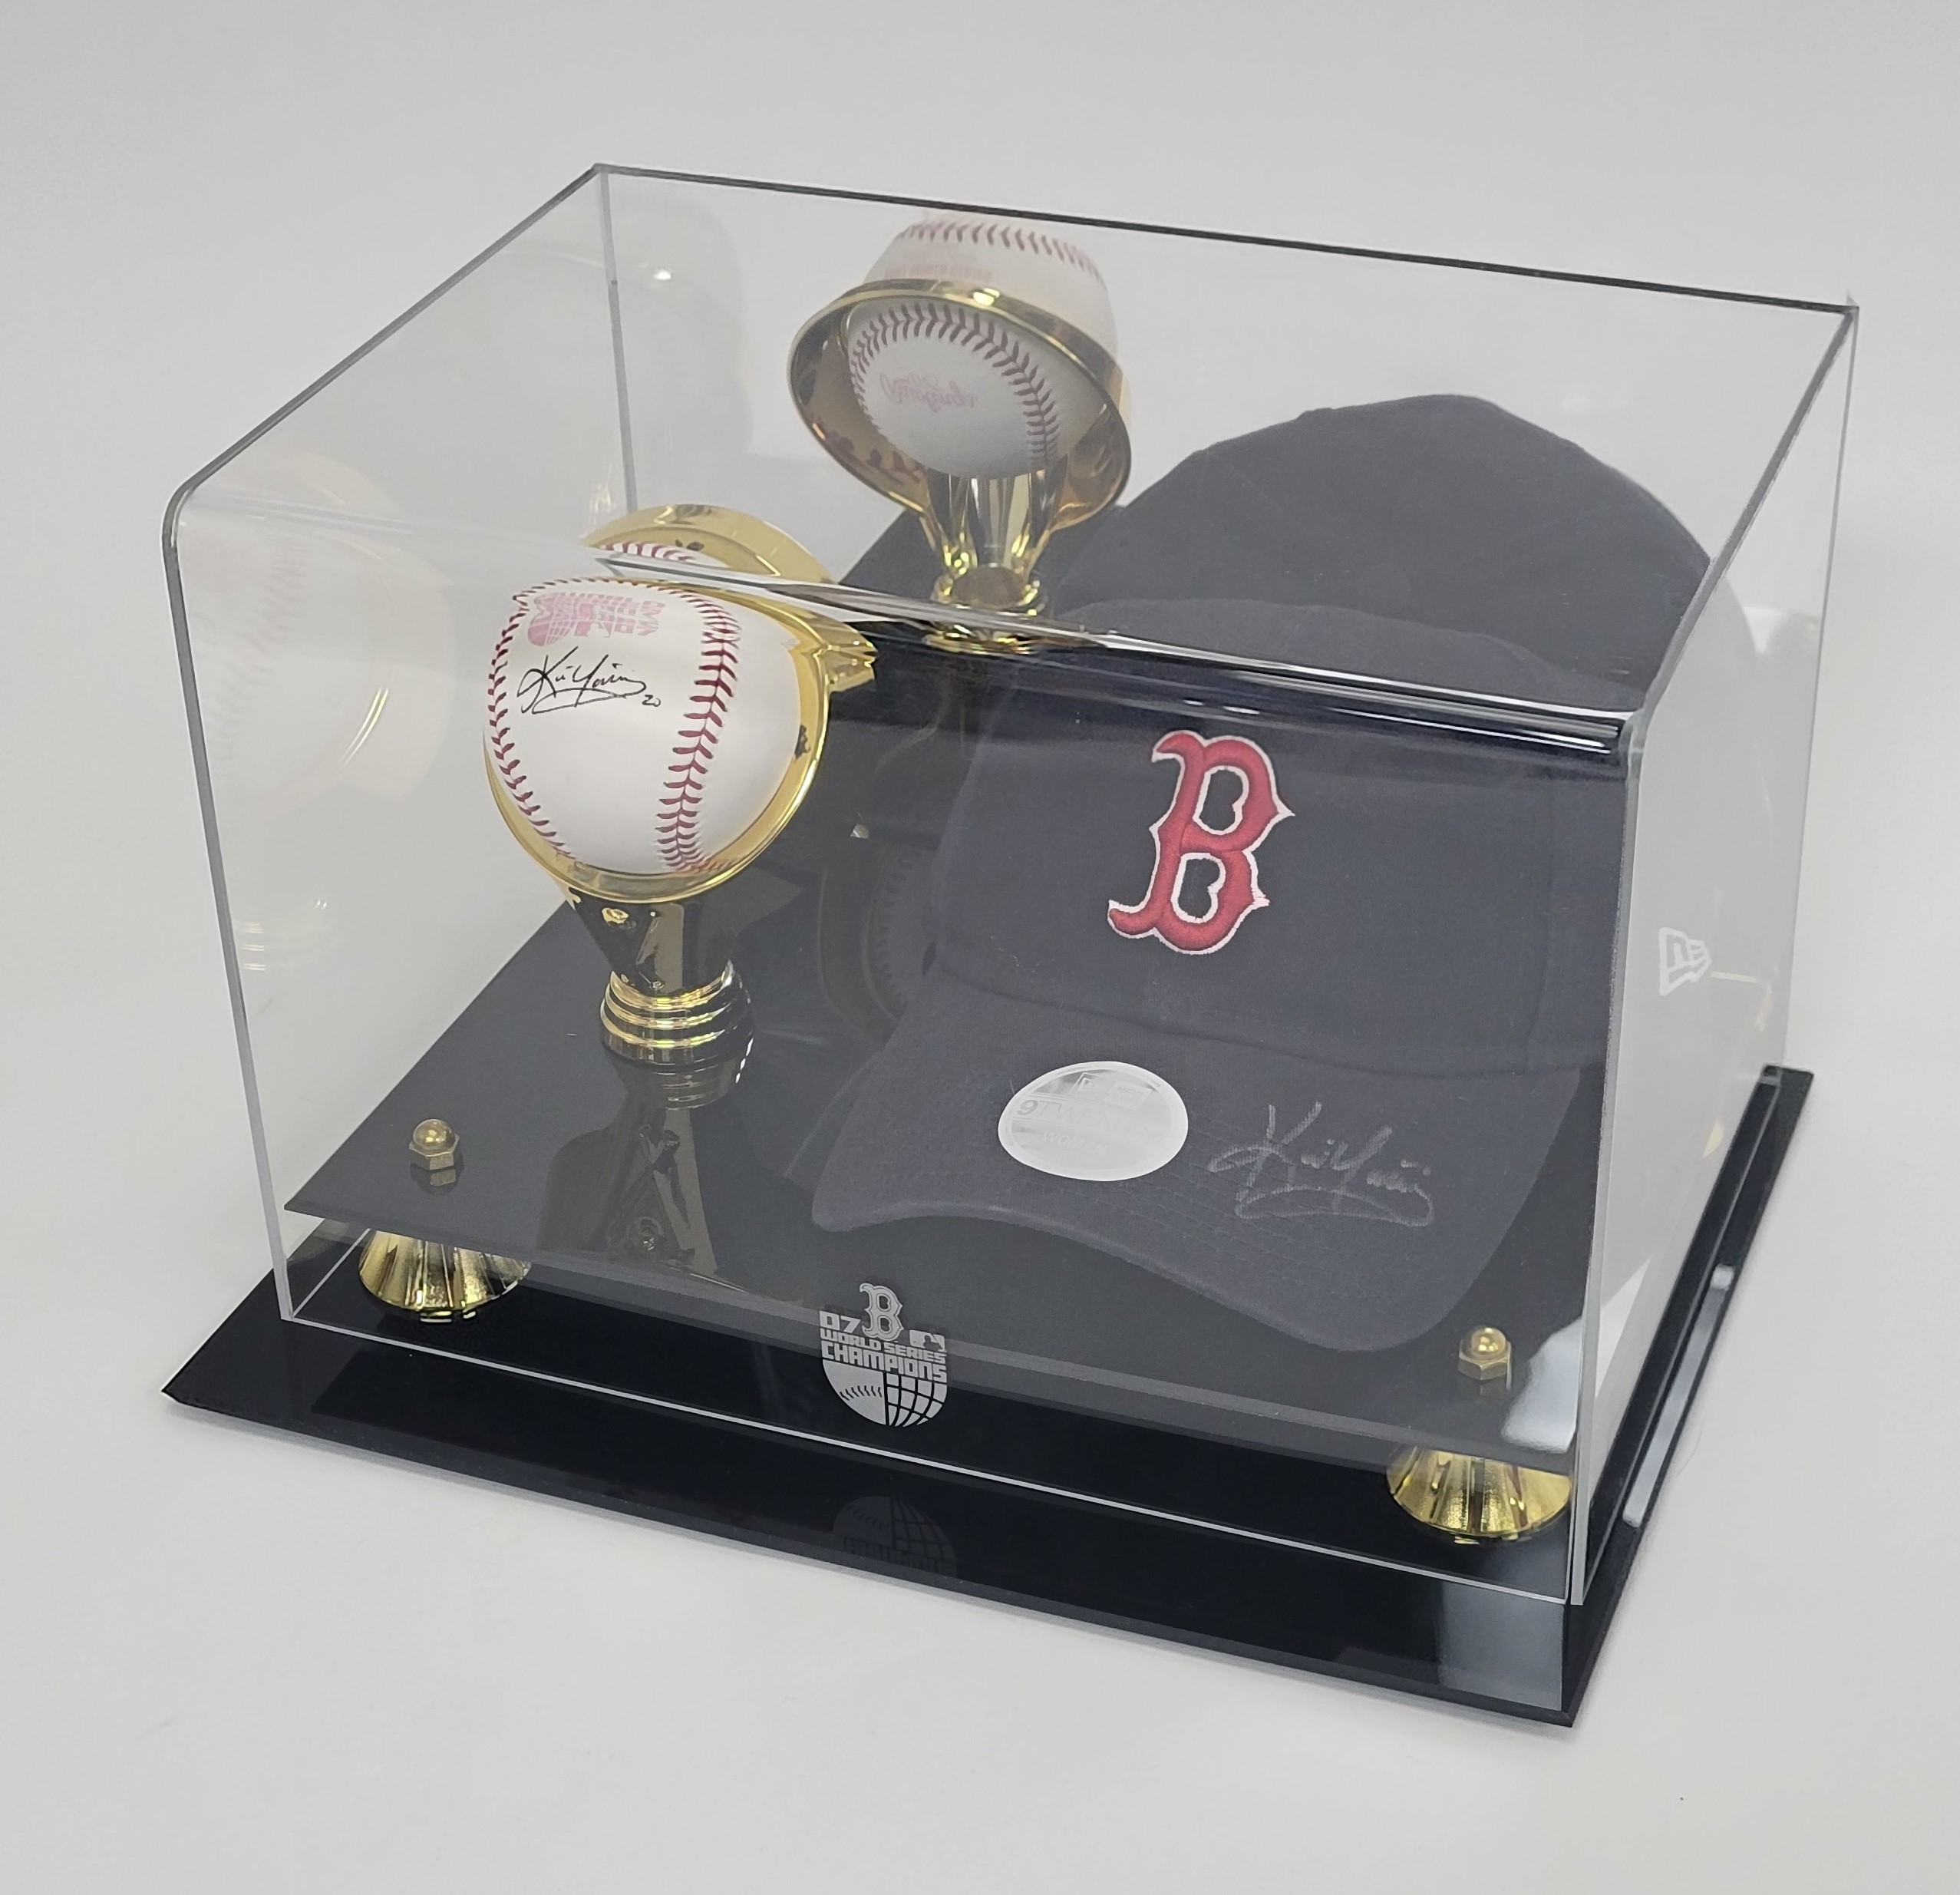 KEVIN YOUKILIS (Red Sox) Signed Official 2007 WORLD SERIES